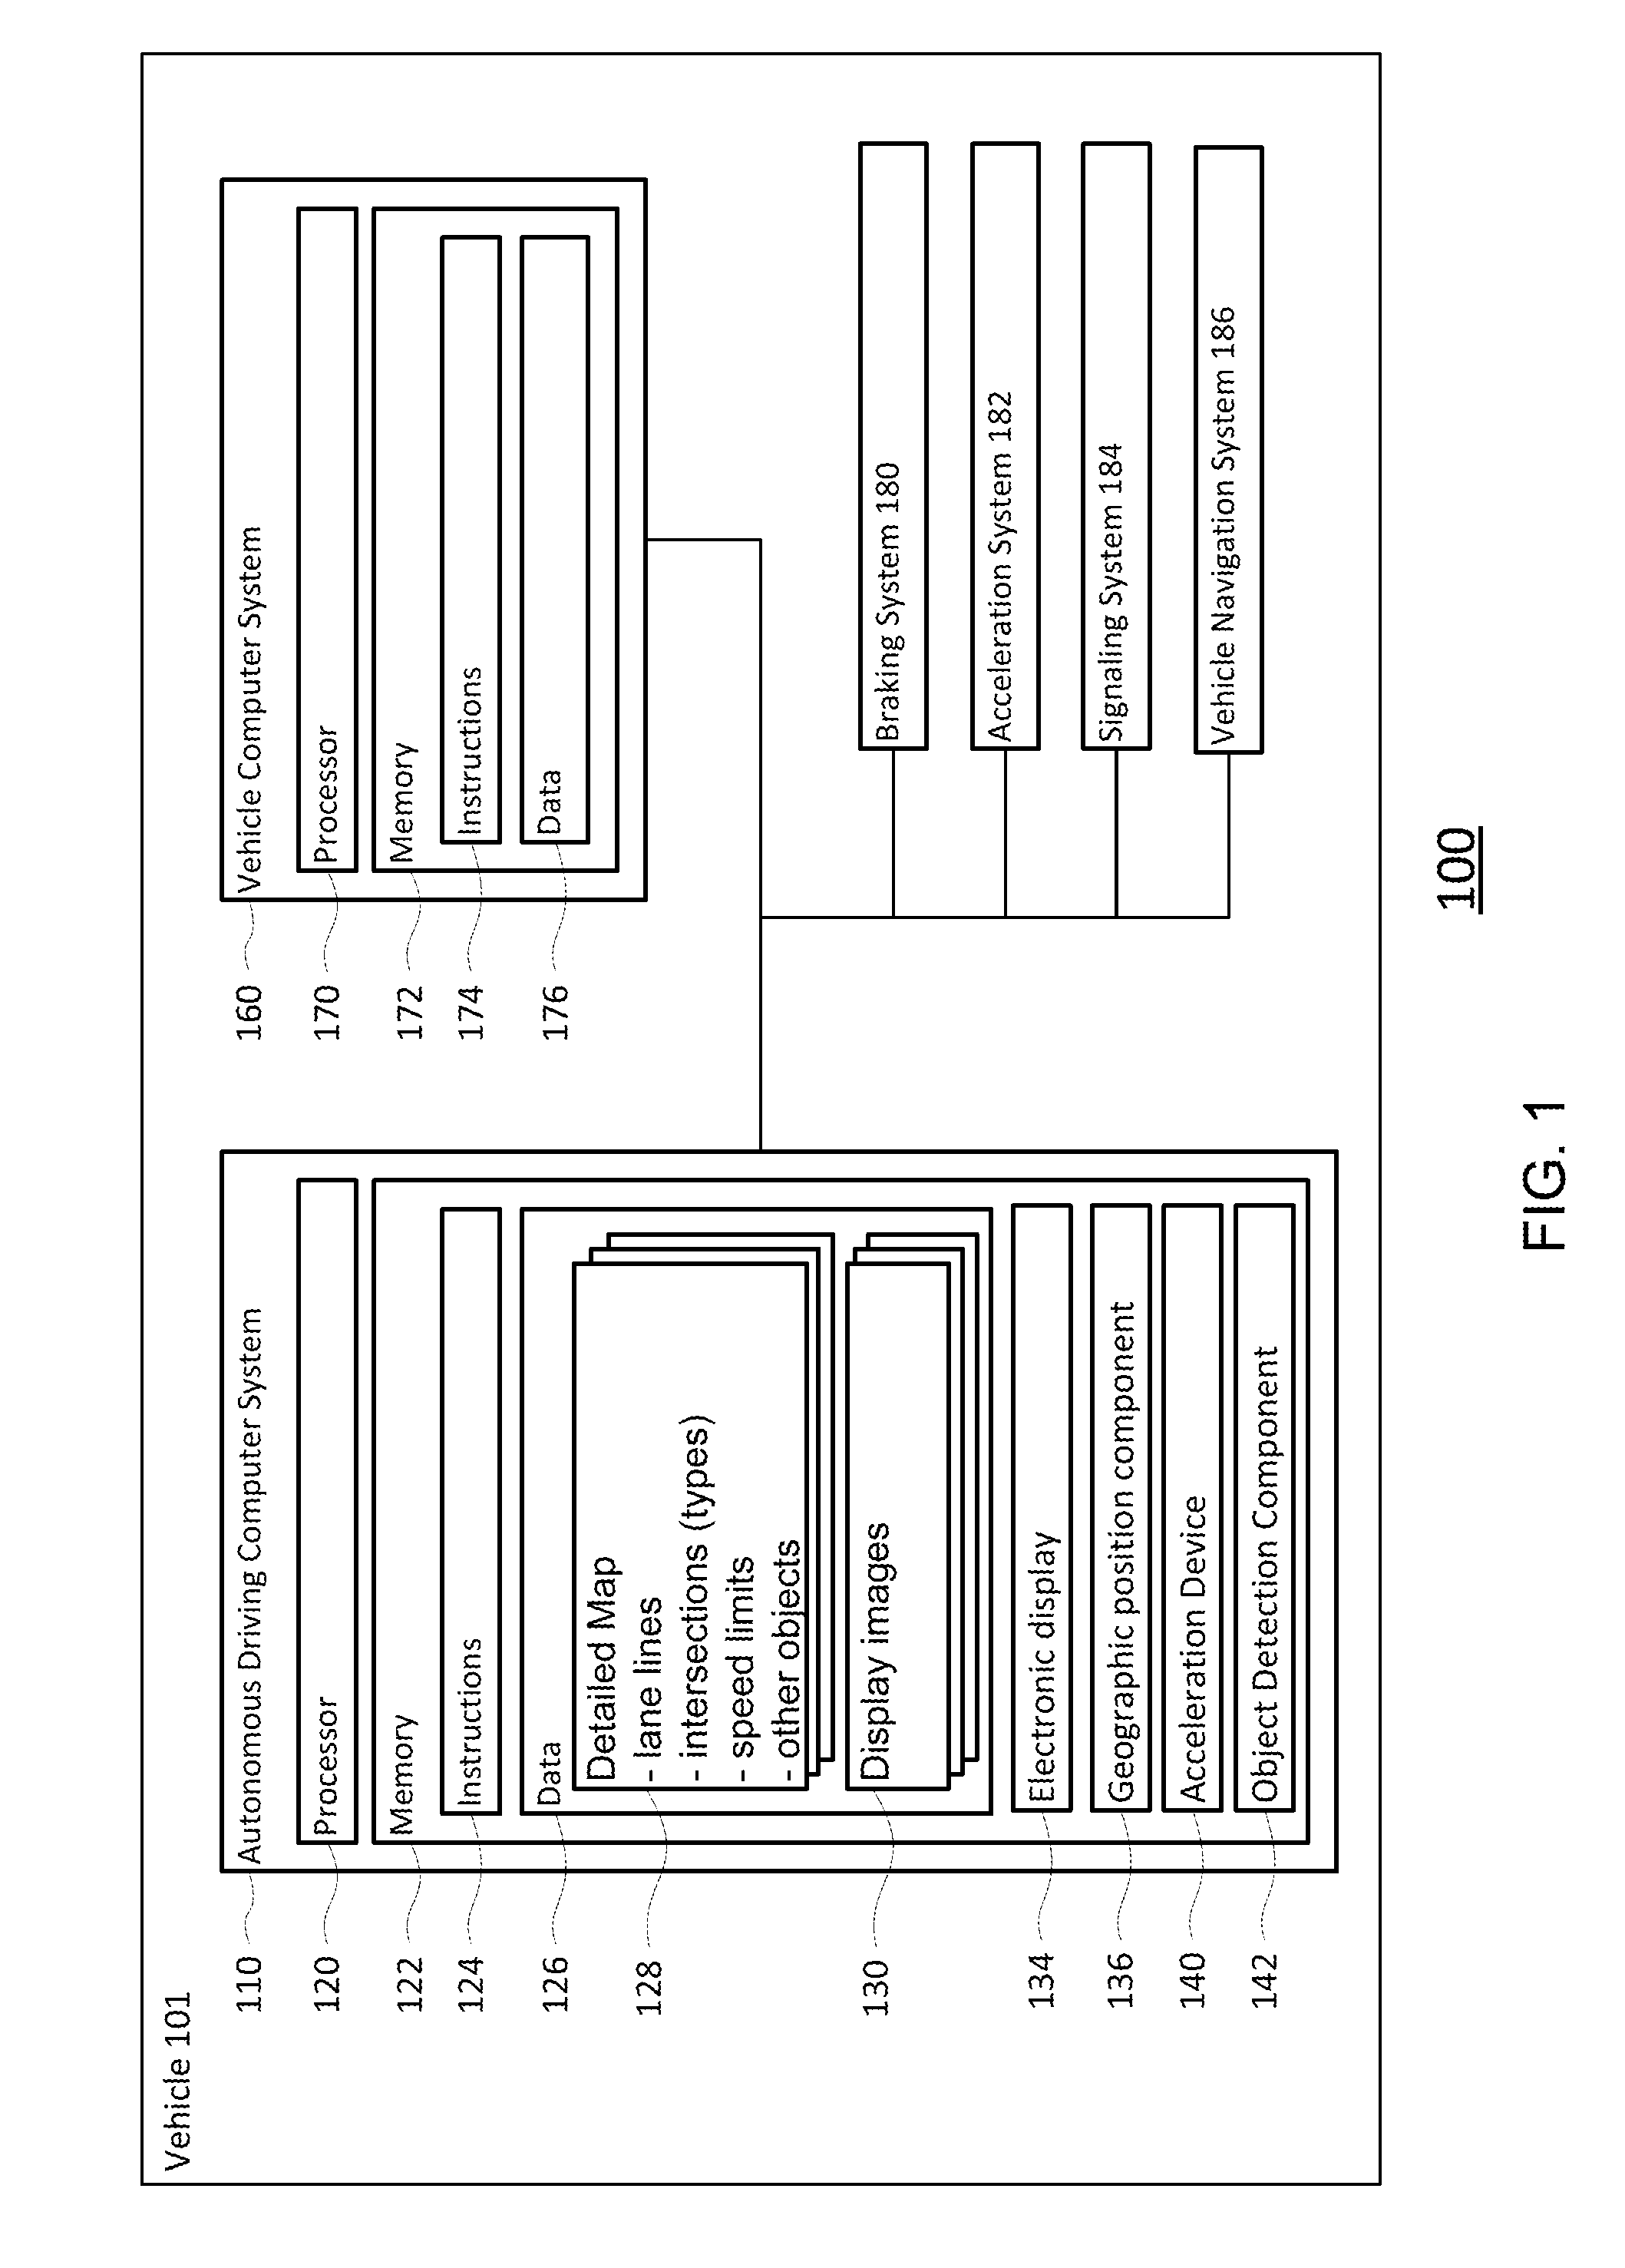 User interface for displaying object-based indications in an autonomous driving system